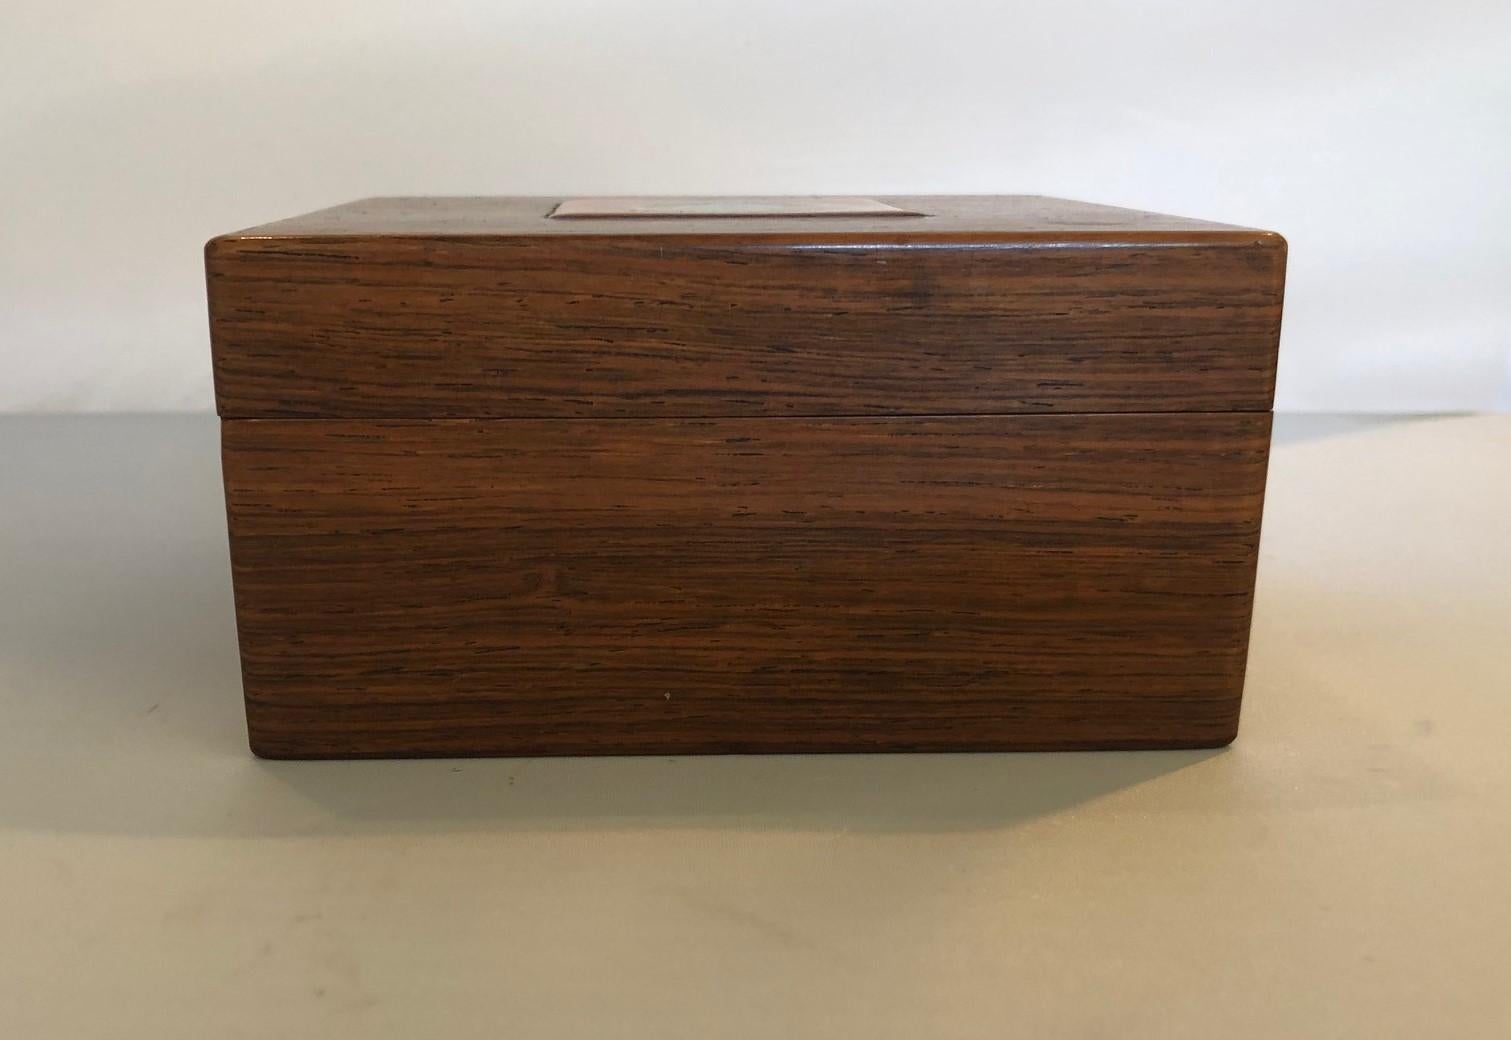 Bodil Eje Danish Rosewood Box by Alfred Klitgaard For Sale 2